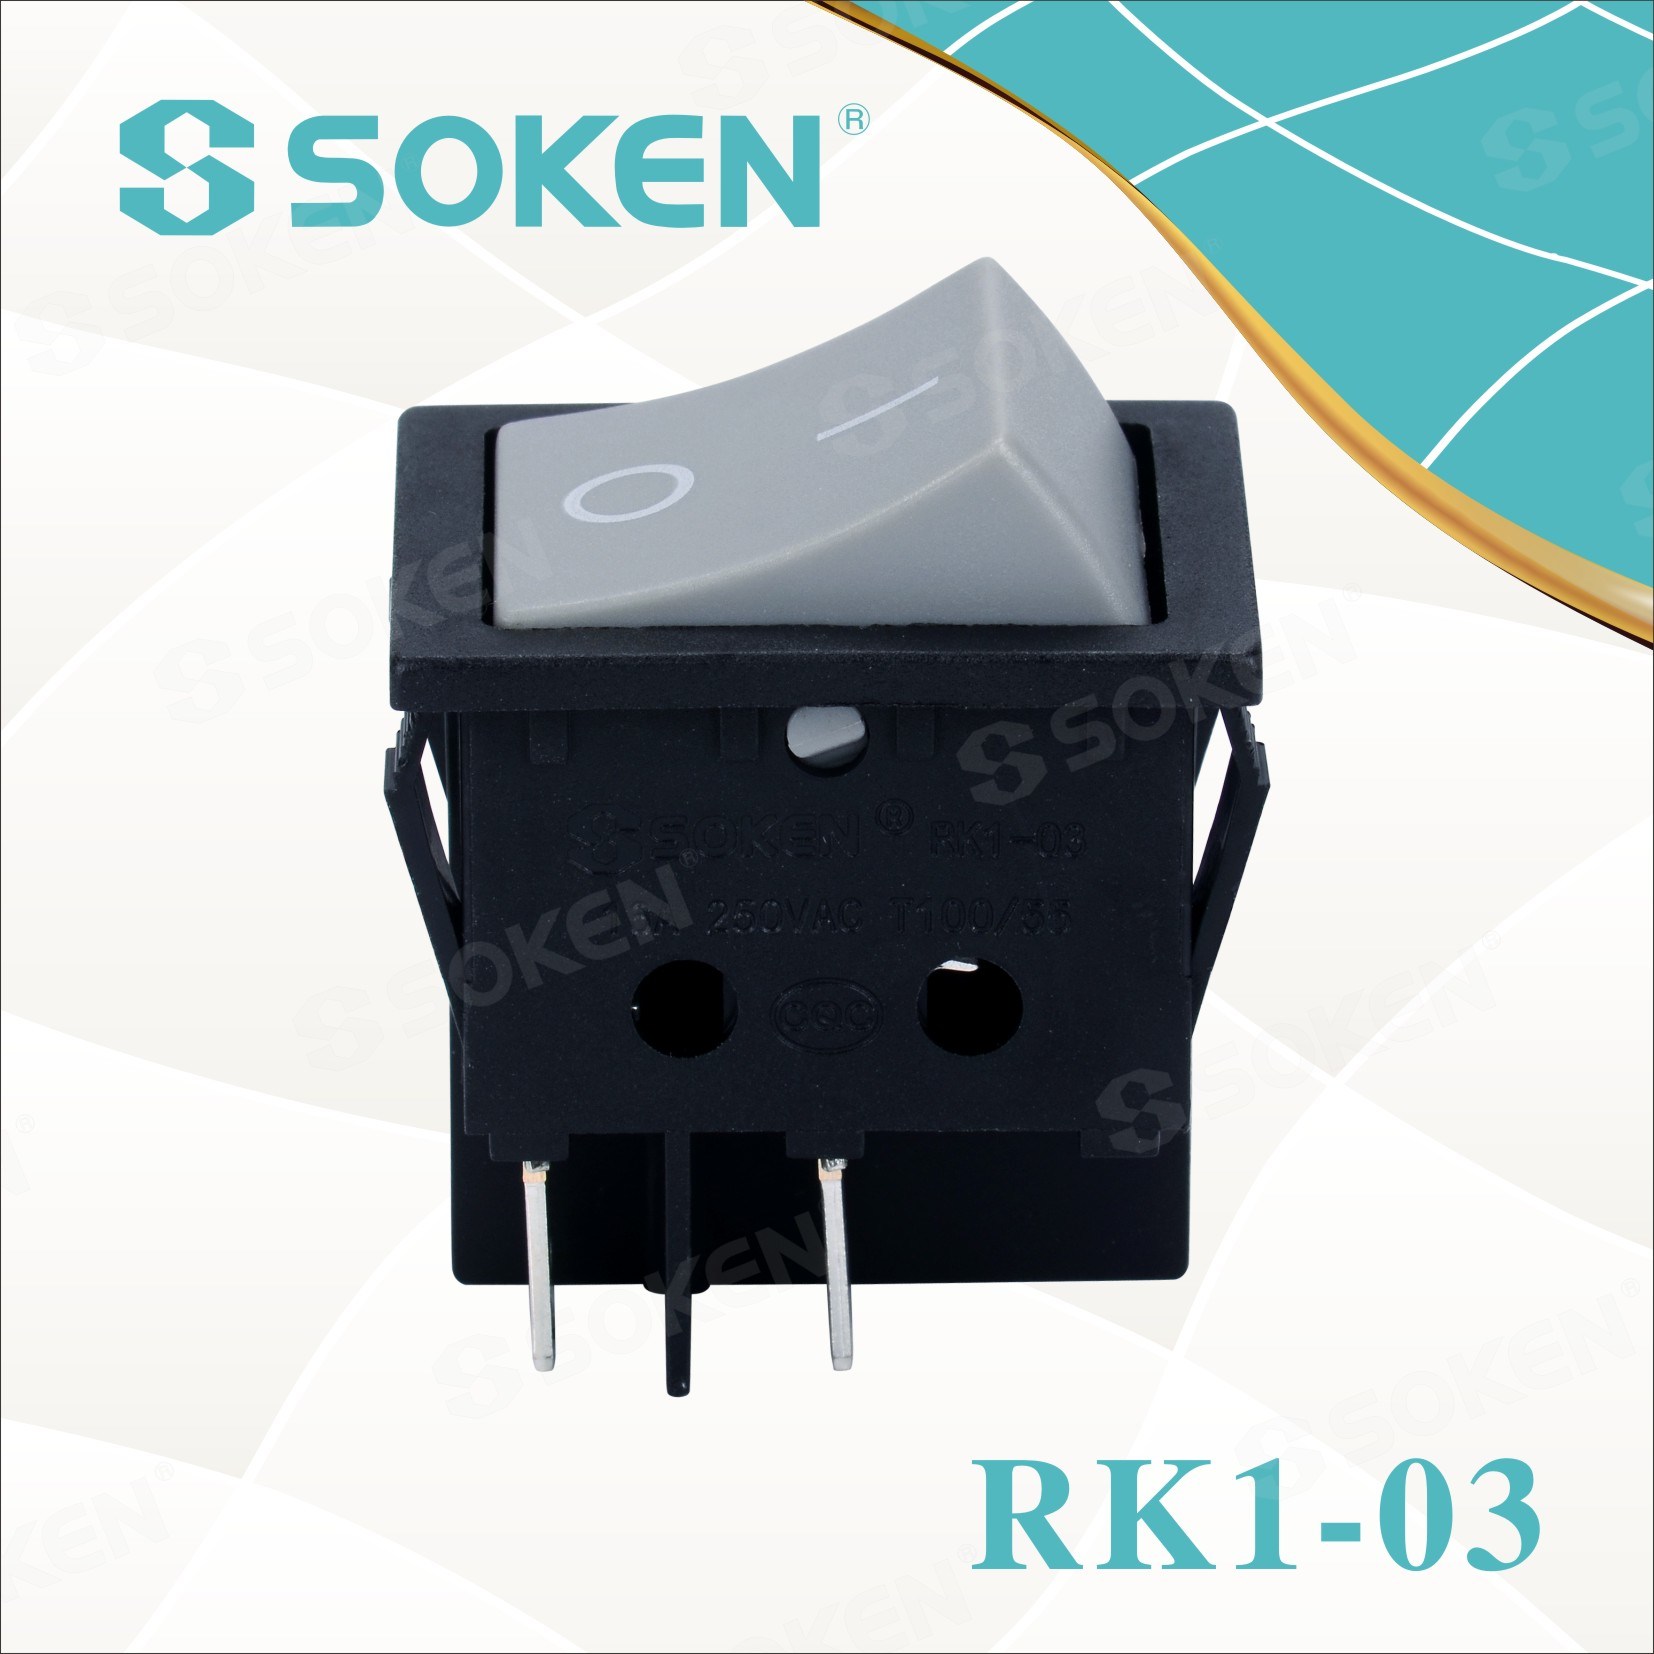 Competitive Price for Chimney Hood Switch Keyboard Switch - Lighted on off Rocker Switch 4 Pins – Master Soken Electrical